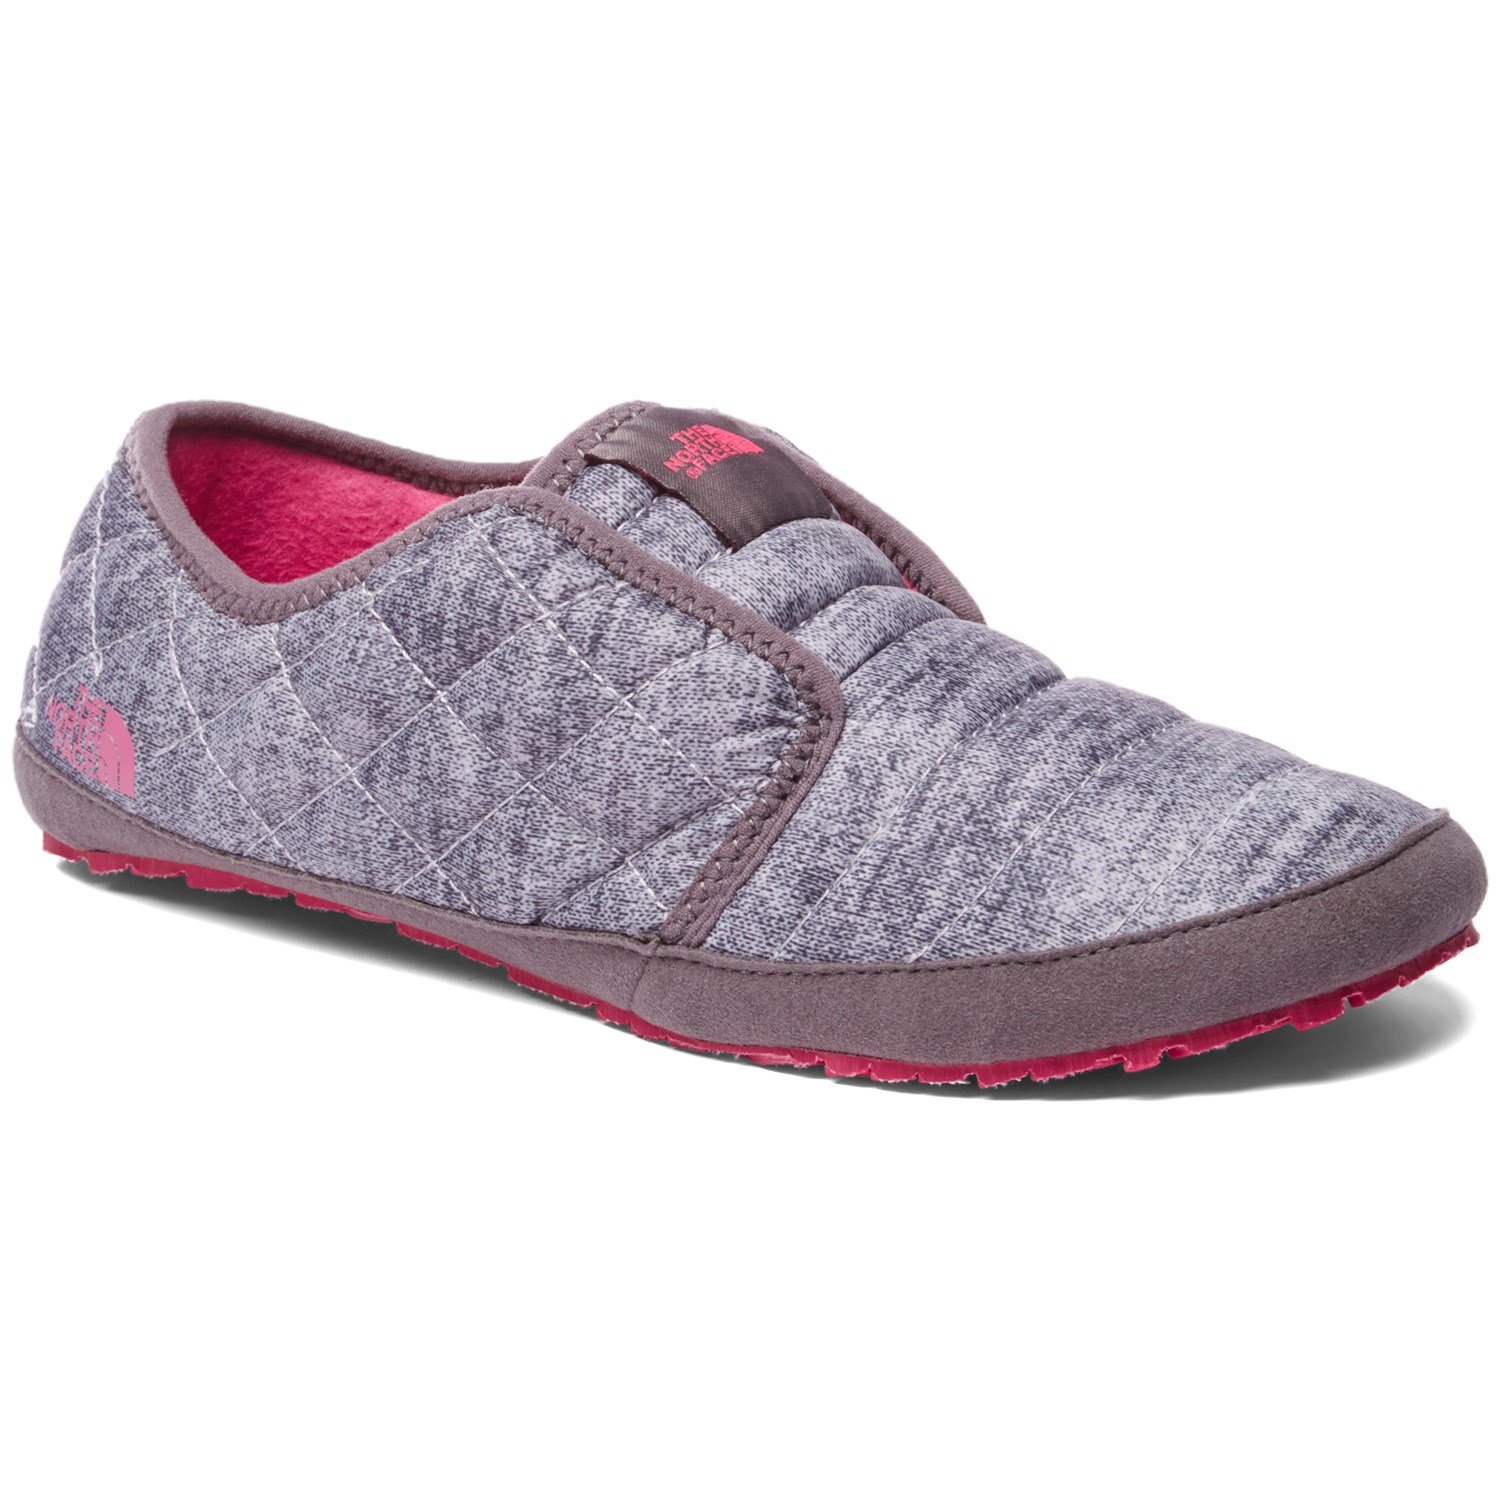 north face thermoball traction mule ii